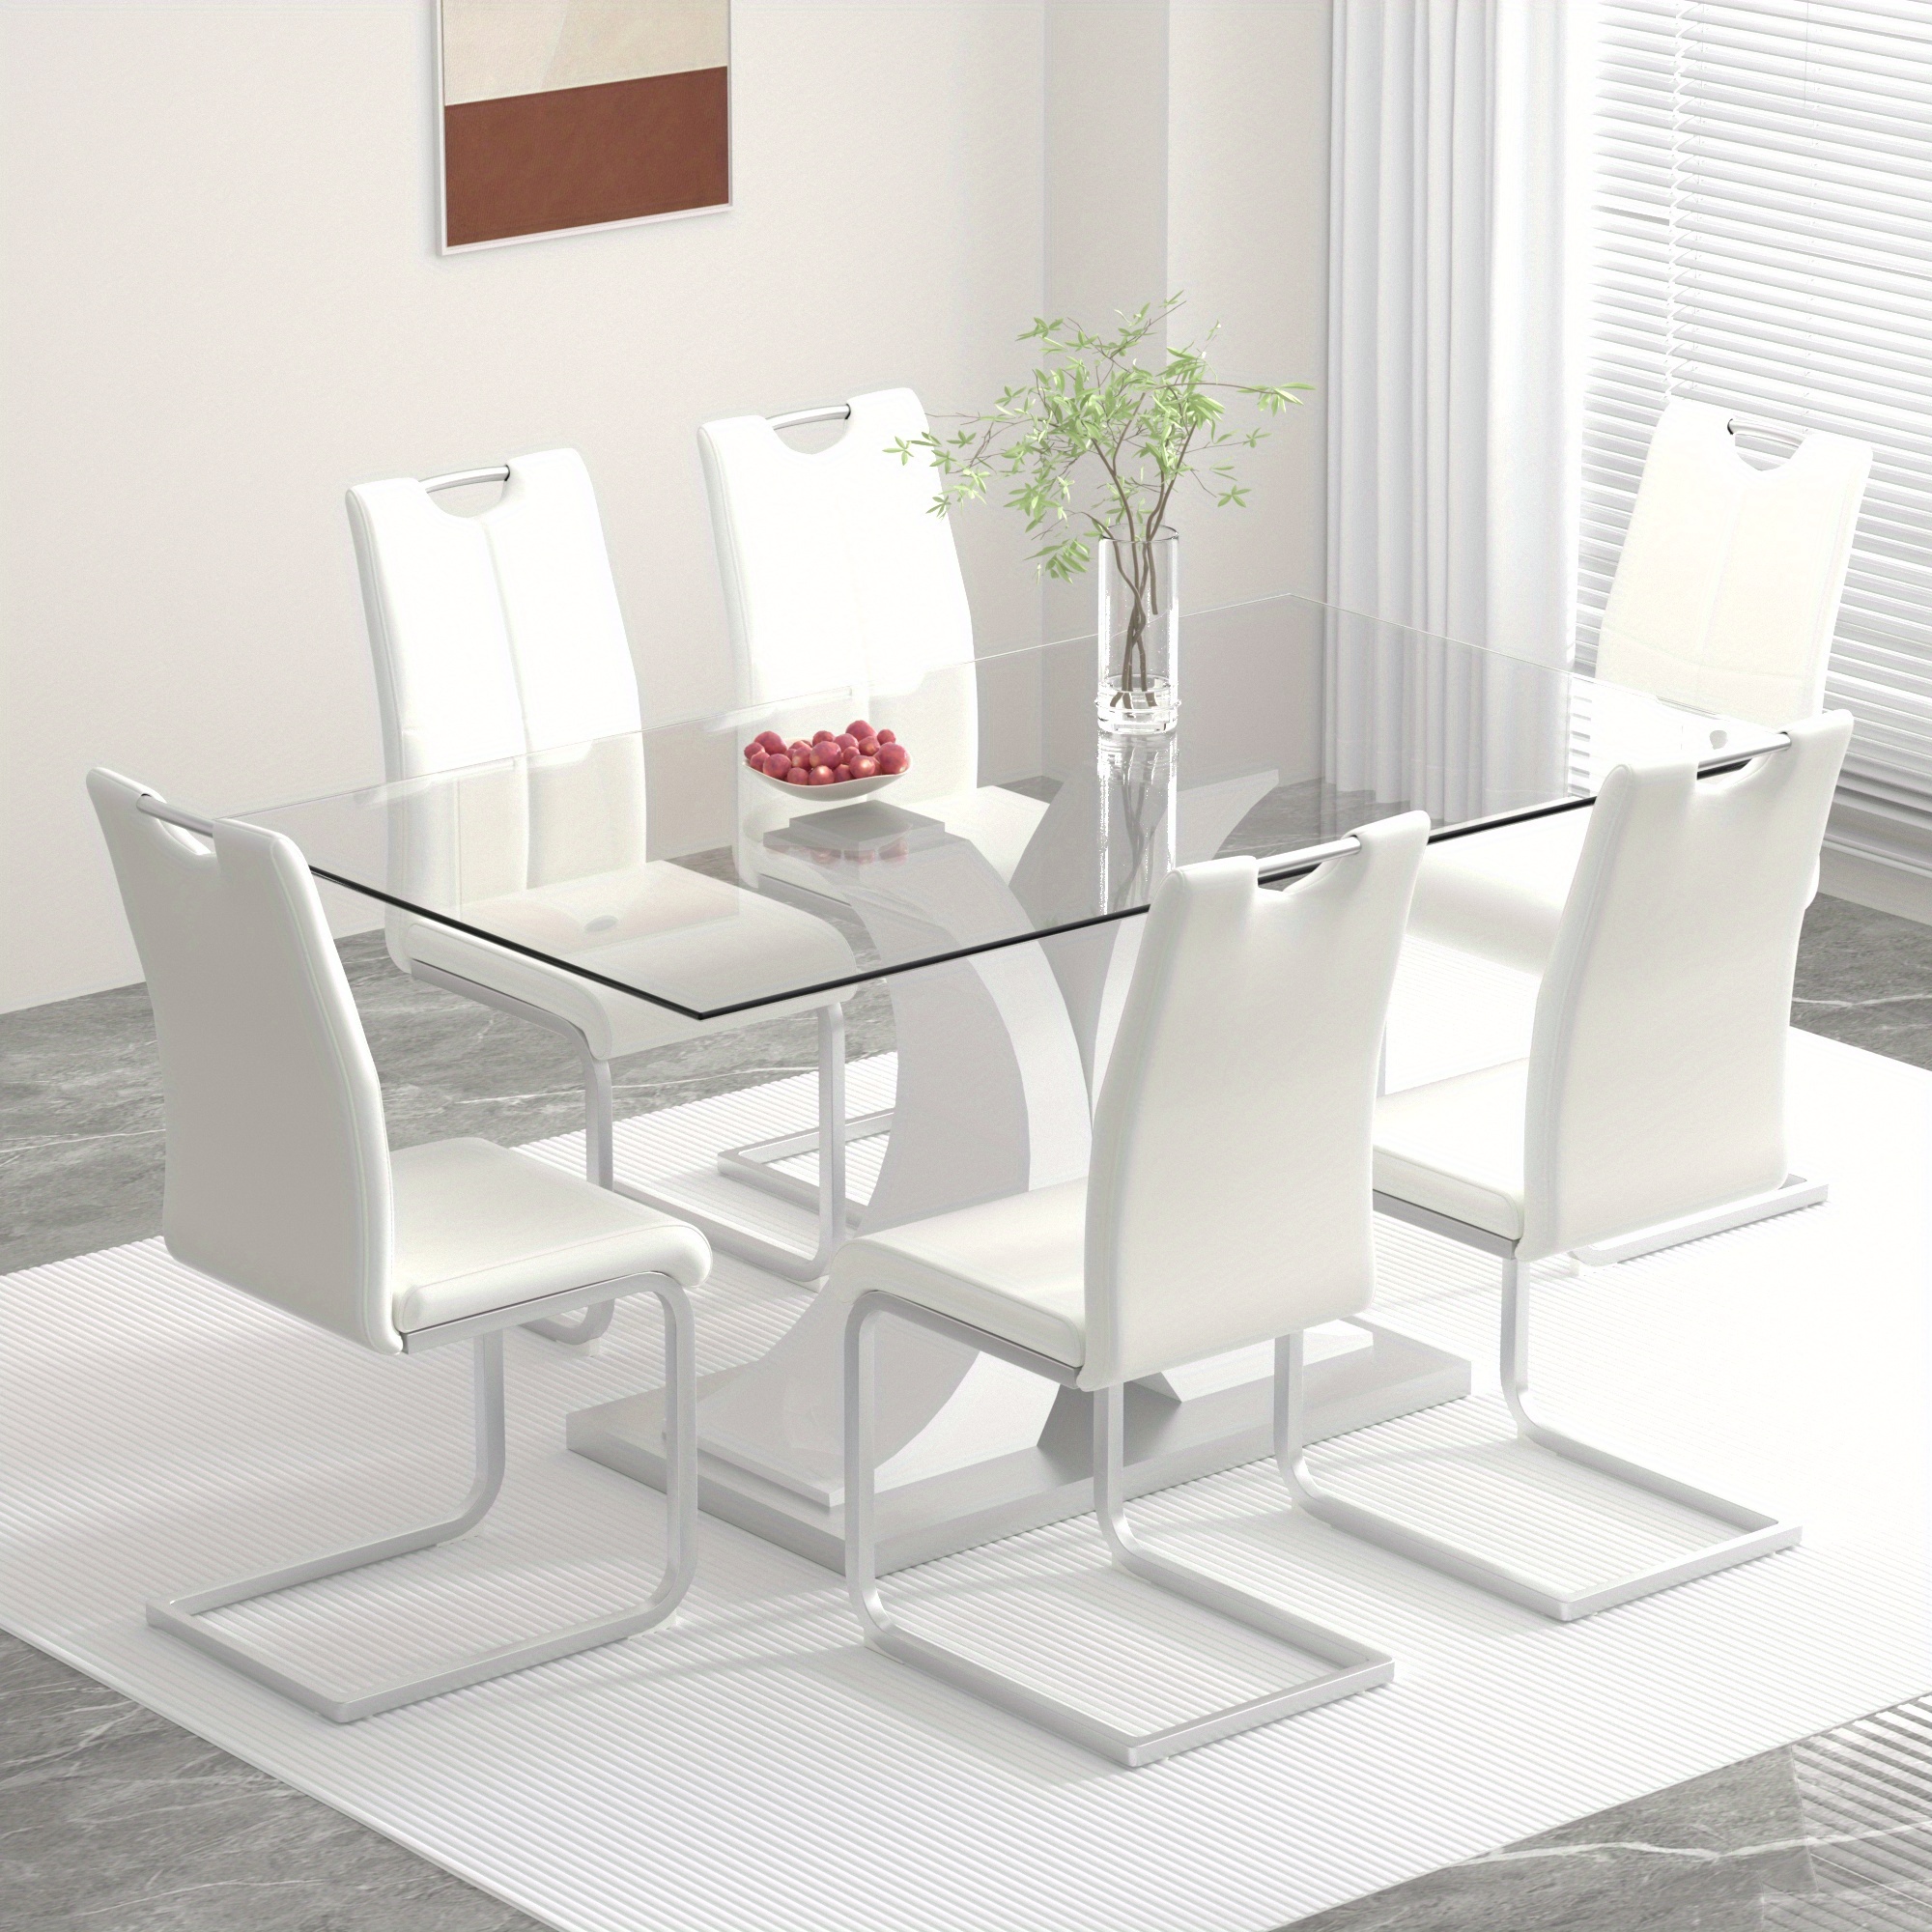 

63" Rectangle Modern Glass Dining Room Table Sets For 6, Glass Dining Table With 6 C-shape Chairs With Handle